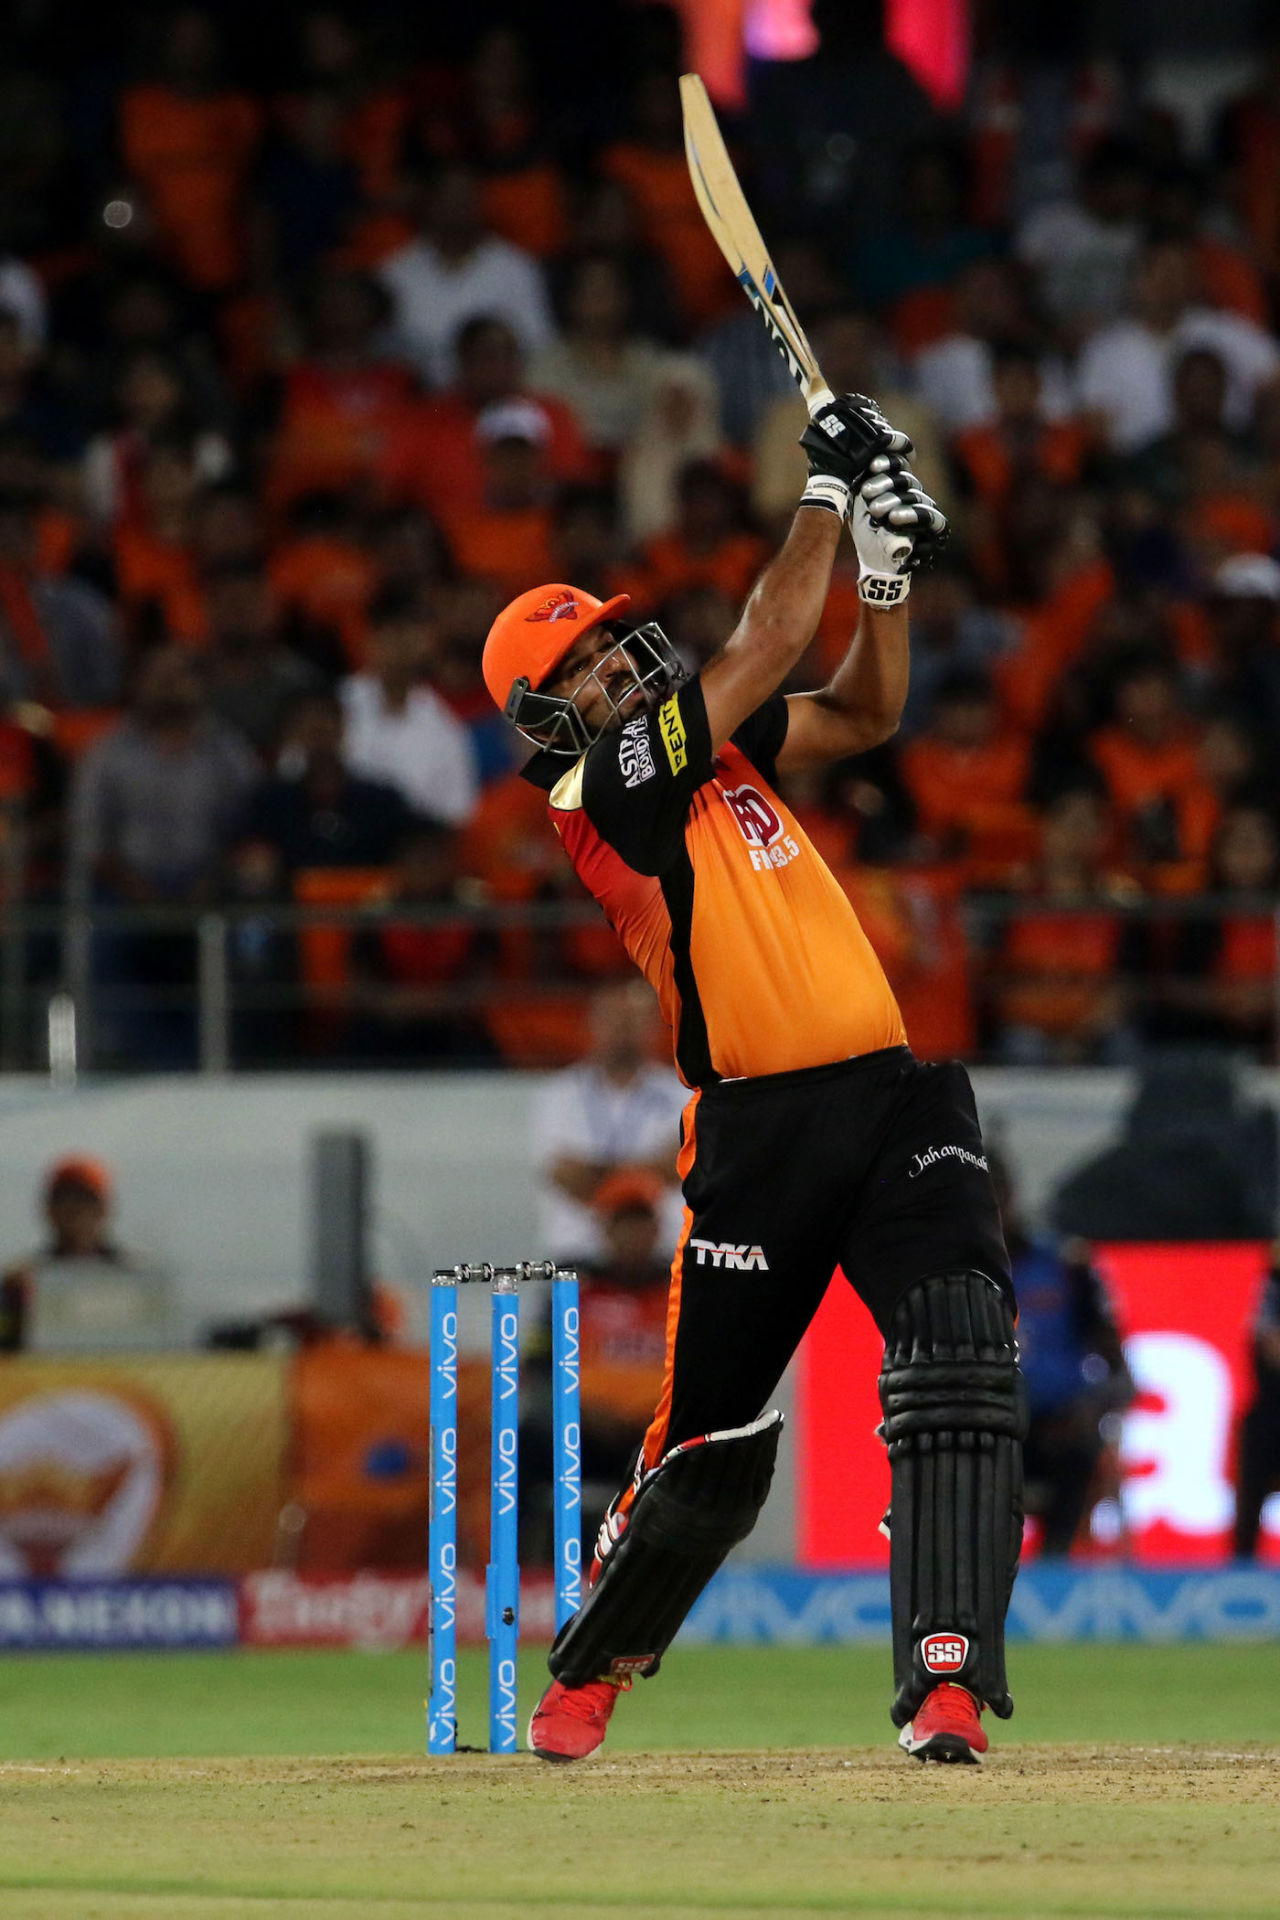 Yusuf Pathan muscles one down the ground, Sunrisers Hyderabad v Chennai Super Kings, IPL 2018, Hyderabad, April 22, 2018